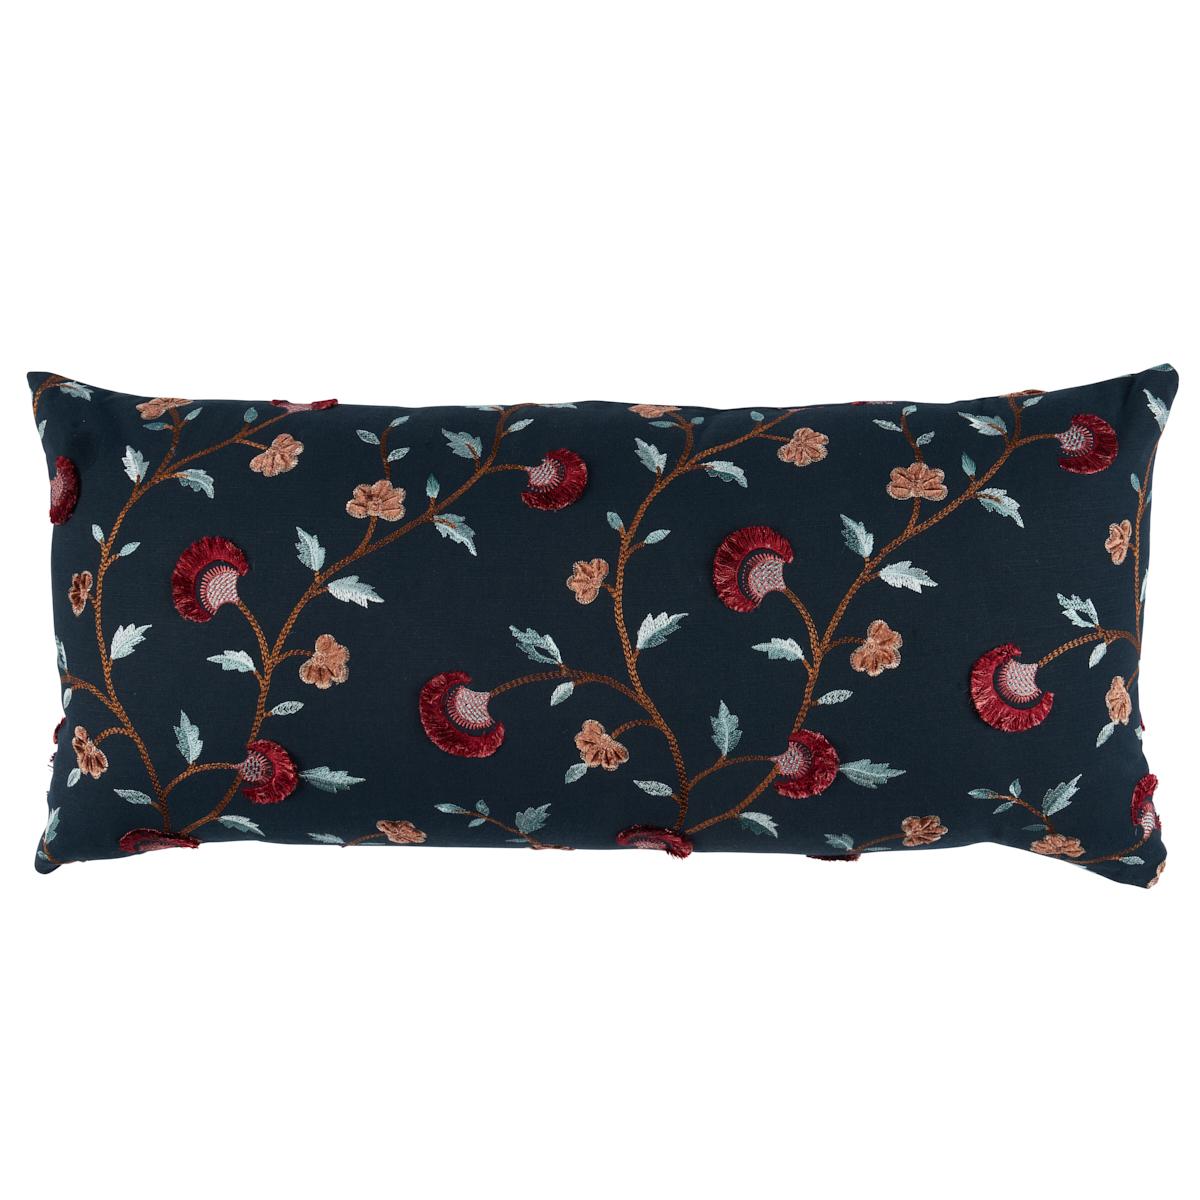 Iyla Embroidery Pillow in Midnight & Rouge 30 x 14"